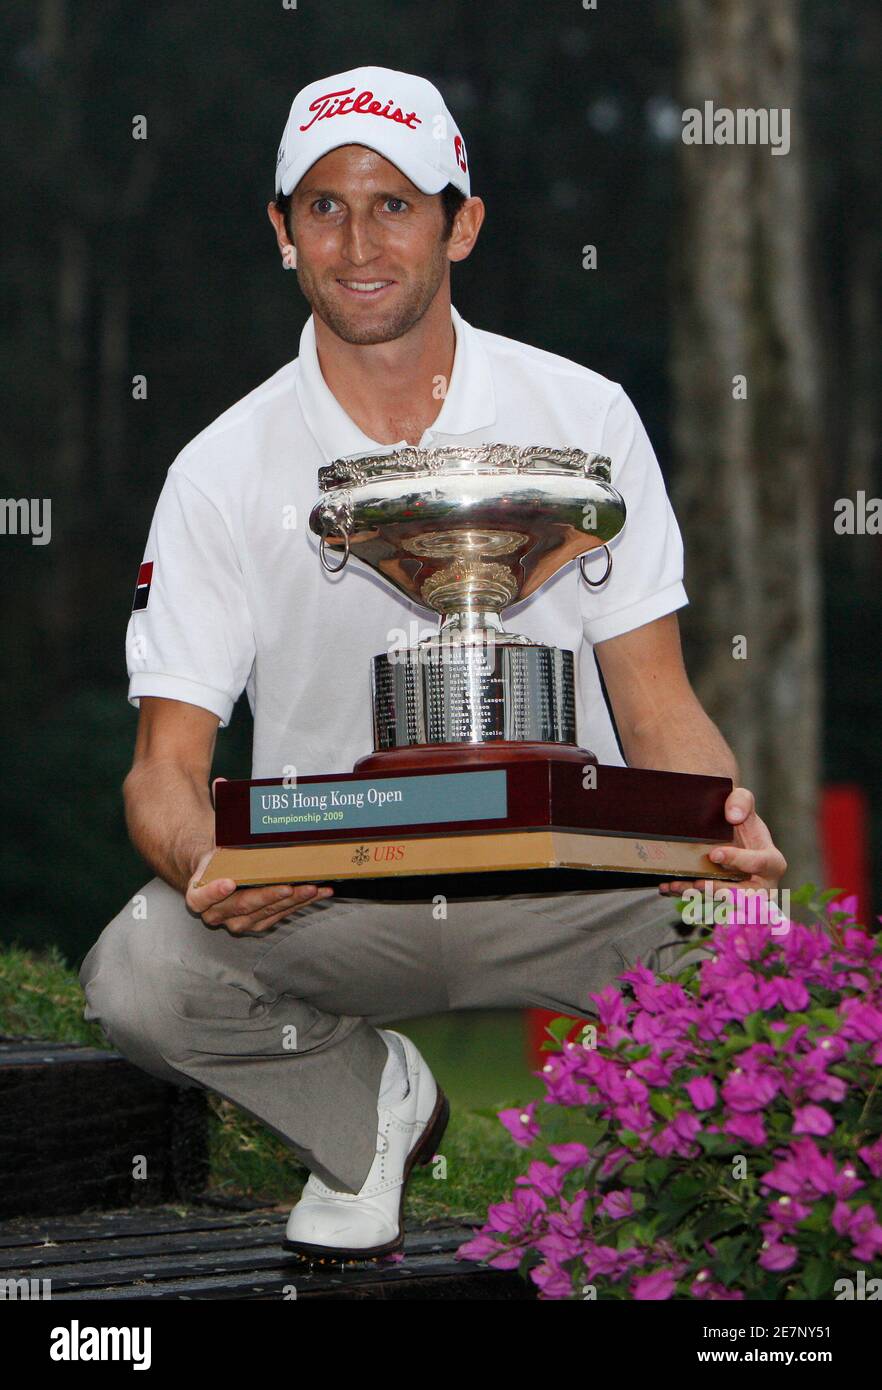 Gregory Bourdy of France holds the trophy after winning the Hong Kong Open golf tournament November 15, 2009.     REUTERS/Tyrone Siu (CHINA SPORT GOLF) Stock Photo